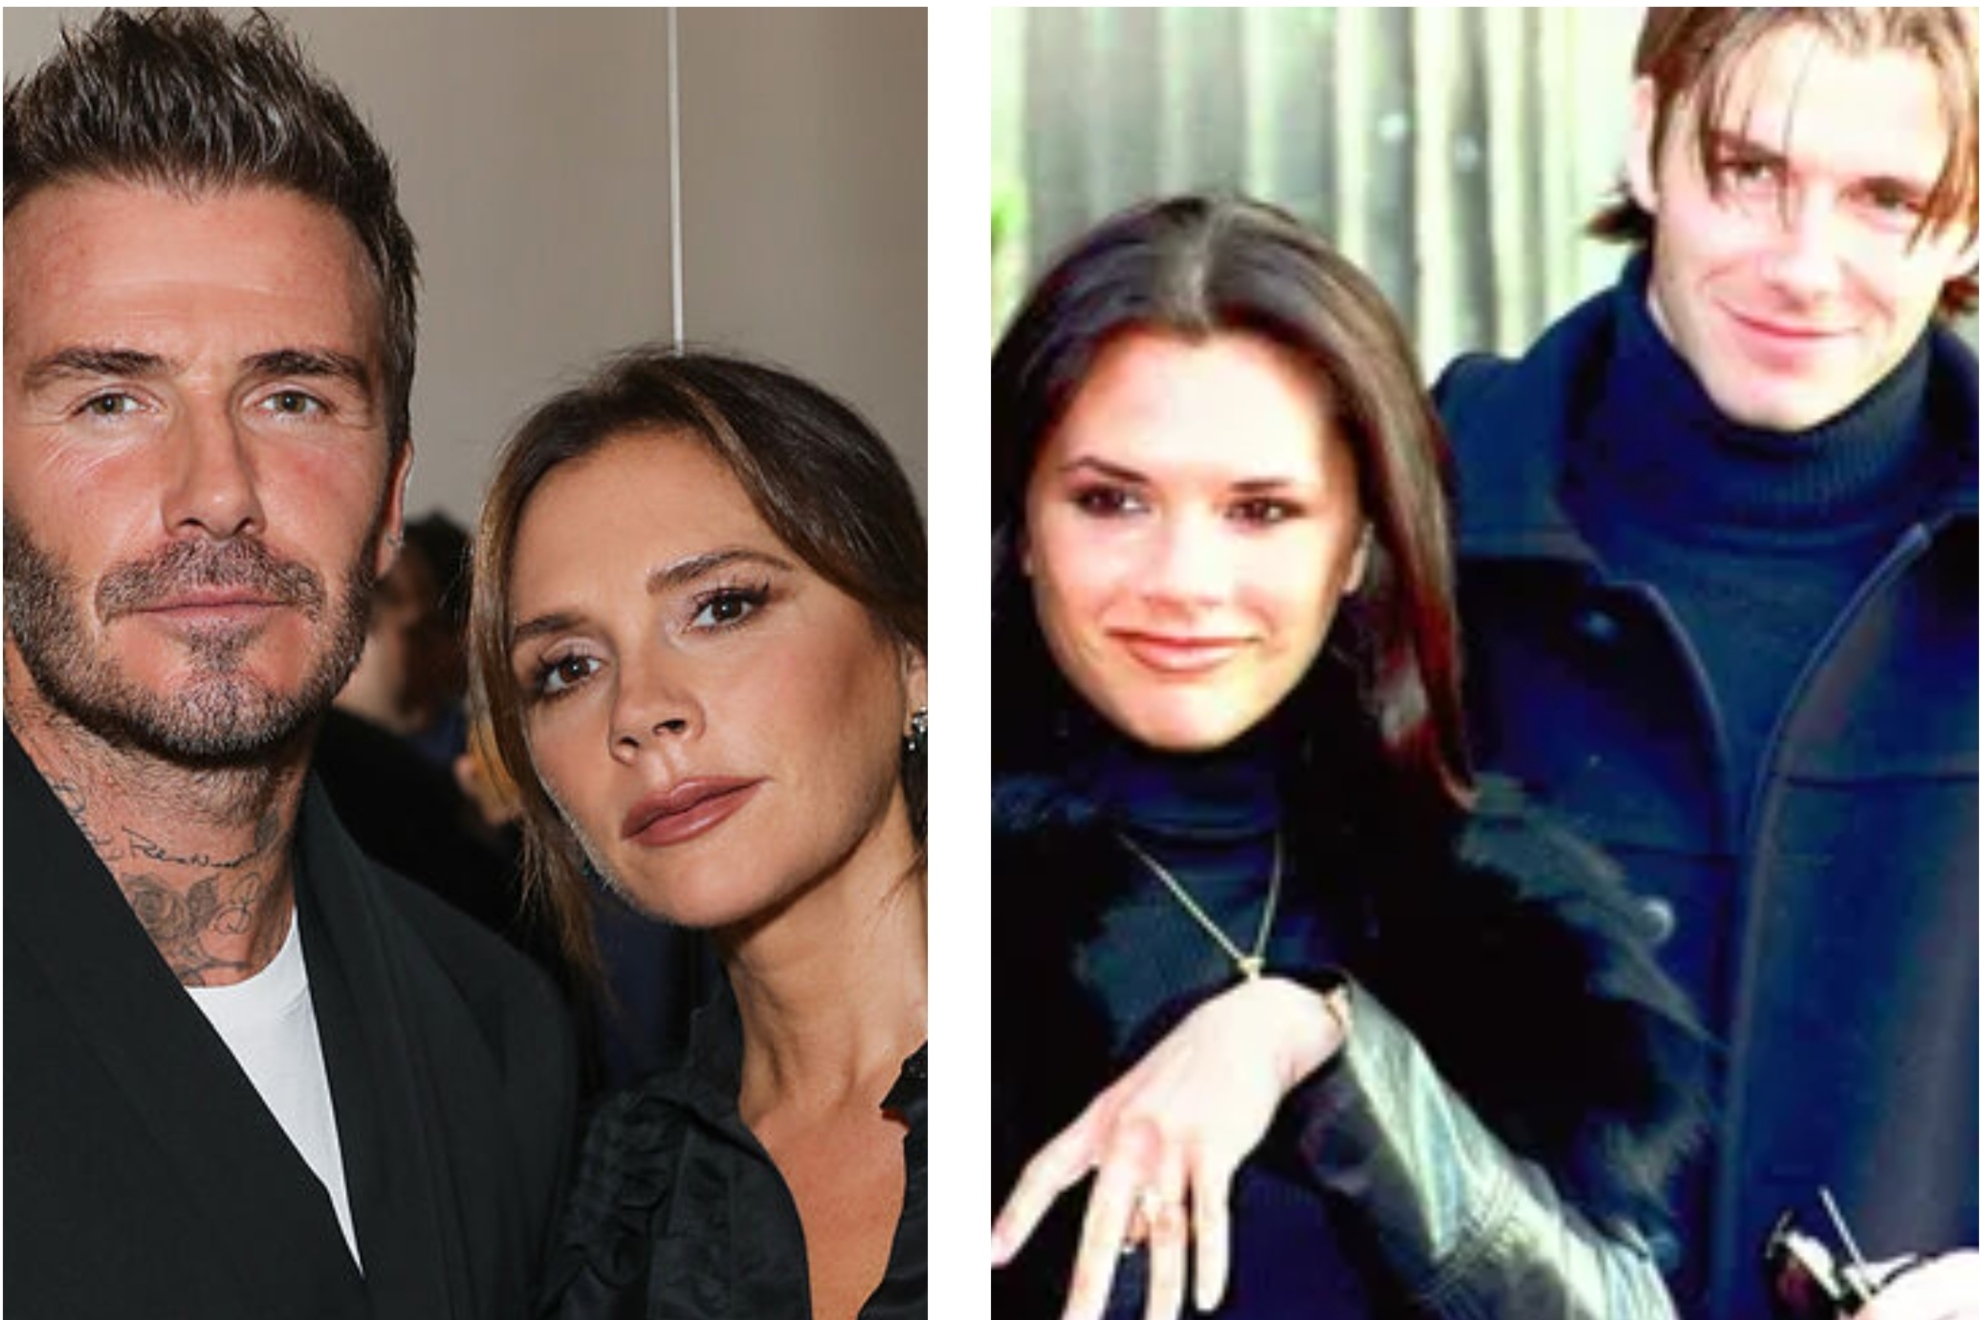 Victoria Beckham tells how she used to meet David in car parks.